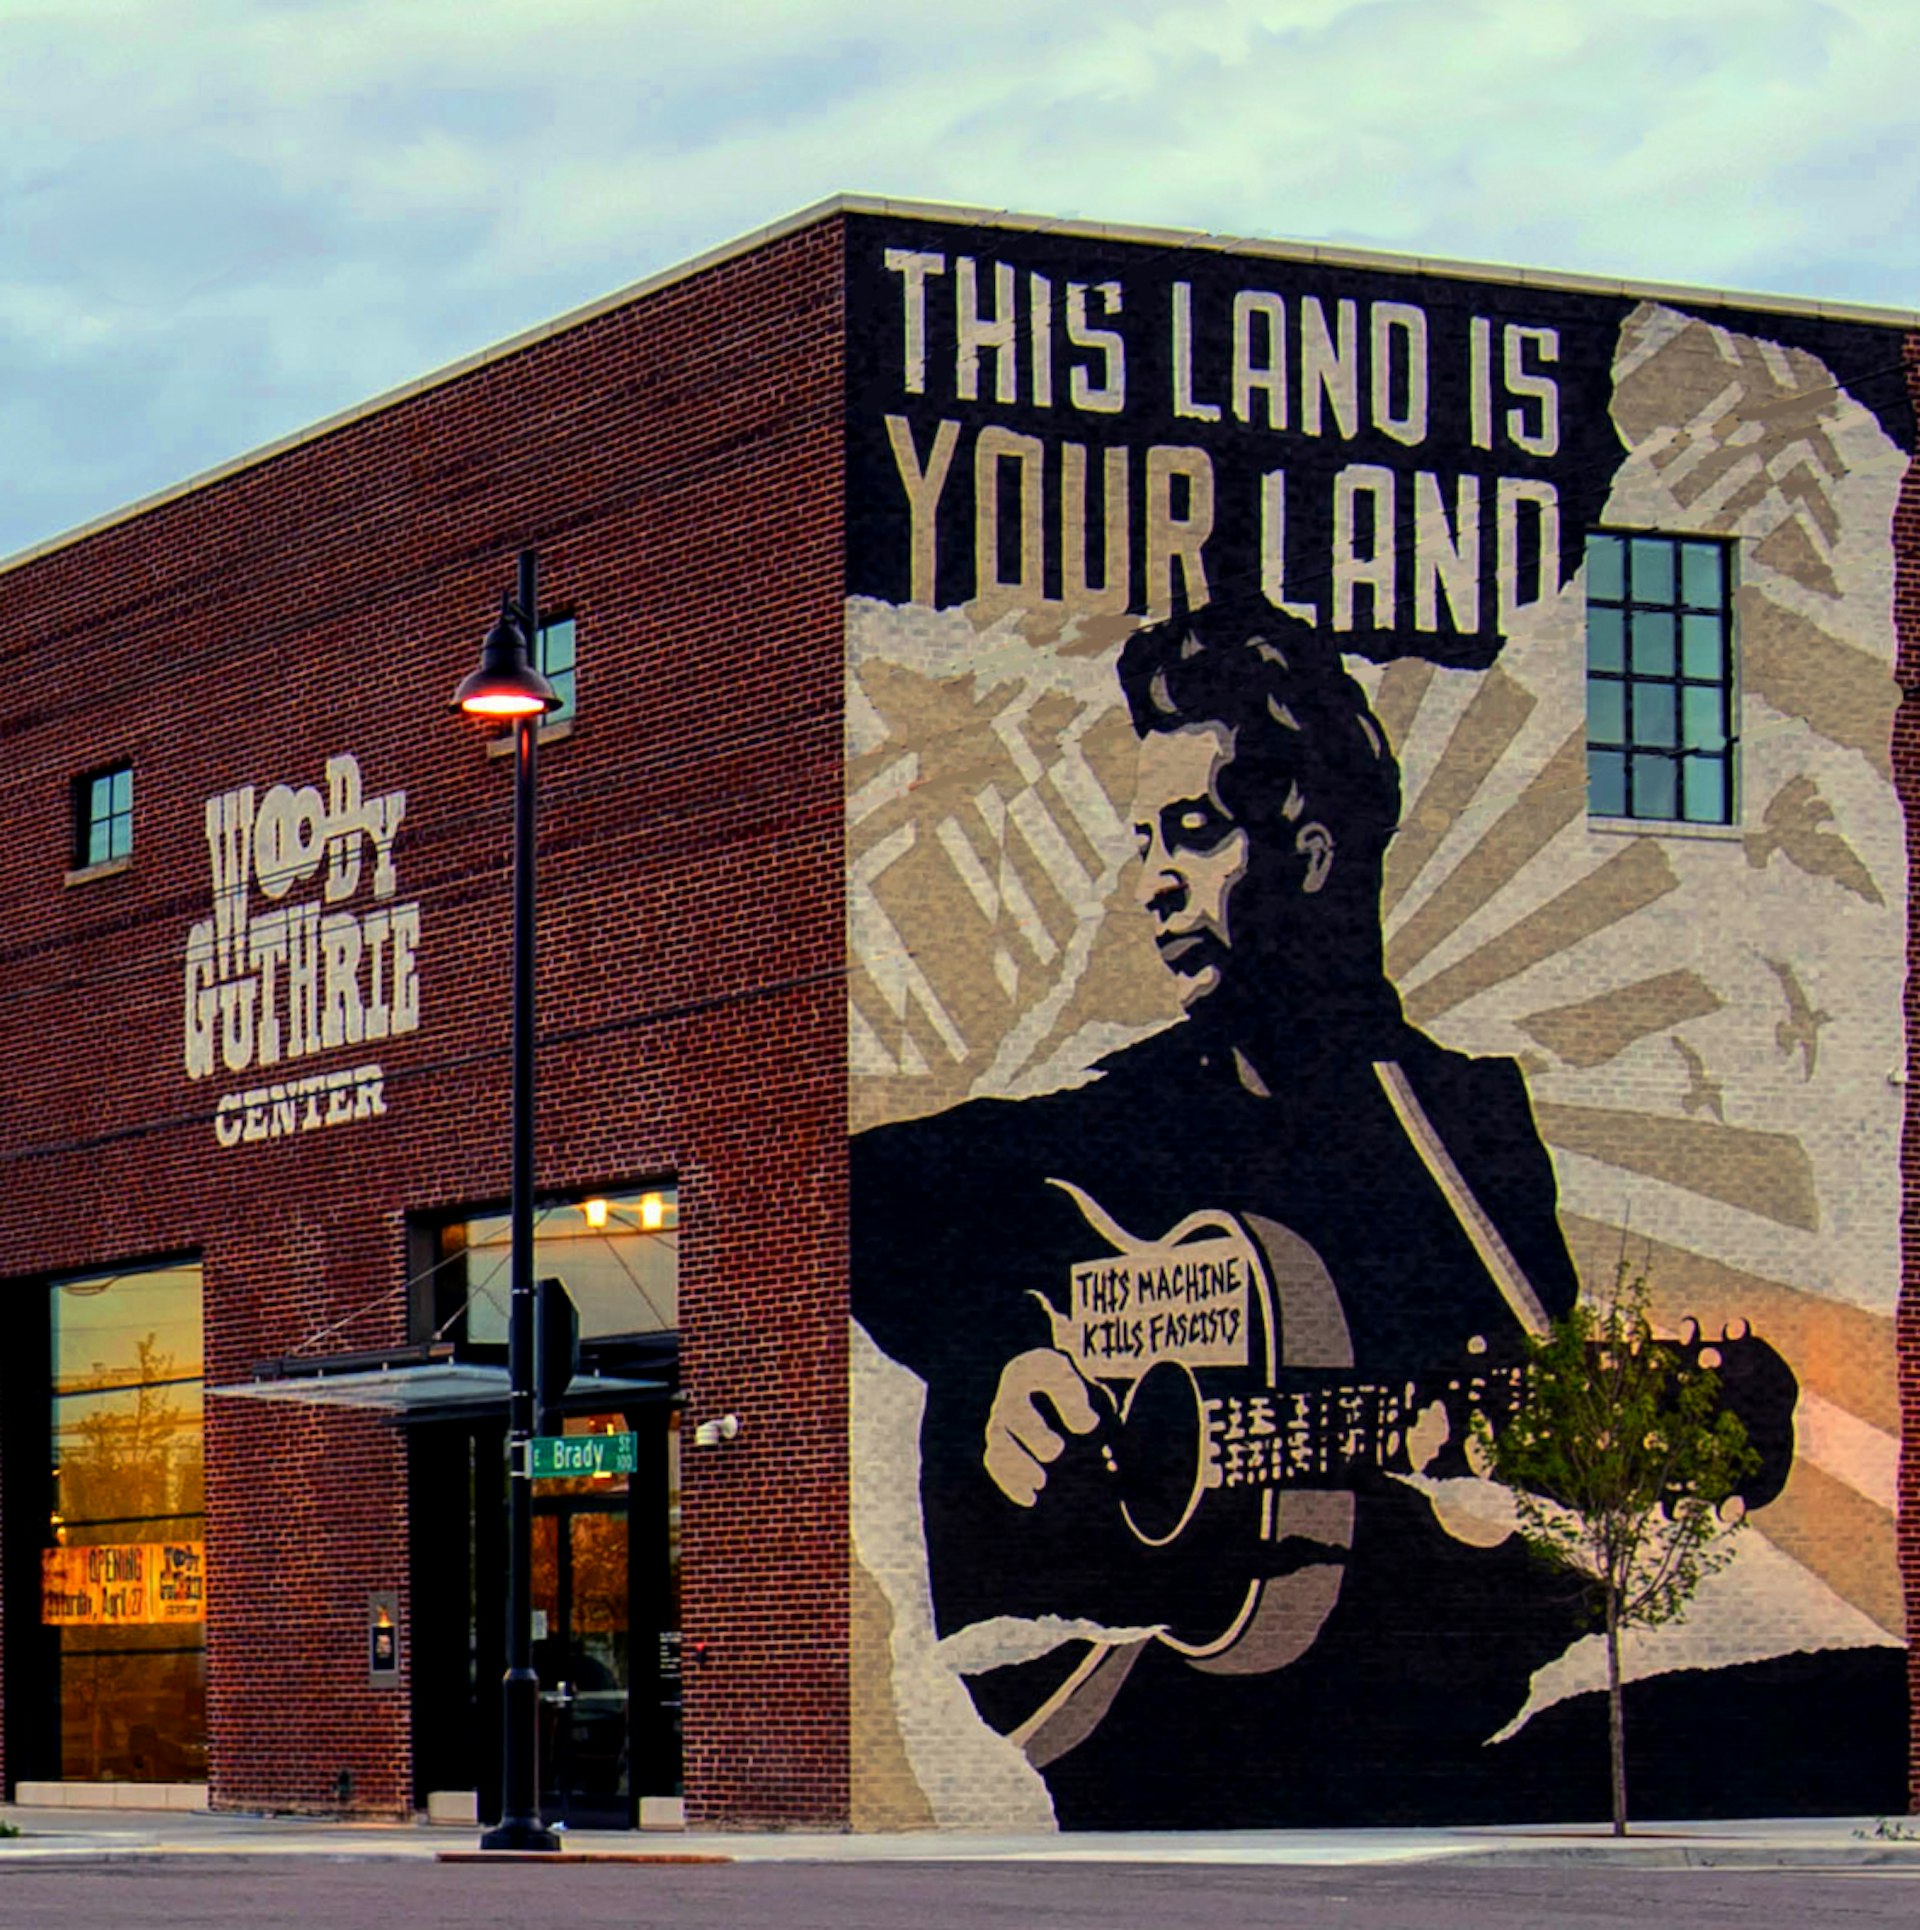 A large mural depicts Woody Guthrie and the phrase 'This land is your land' on the side of the center. USA museums for music lovers